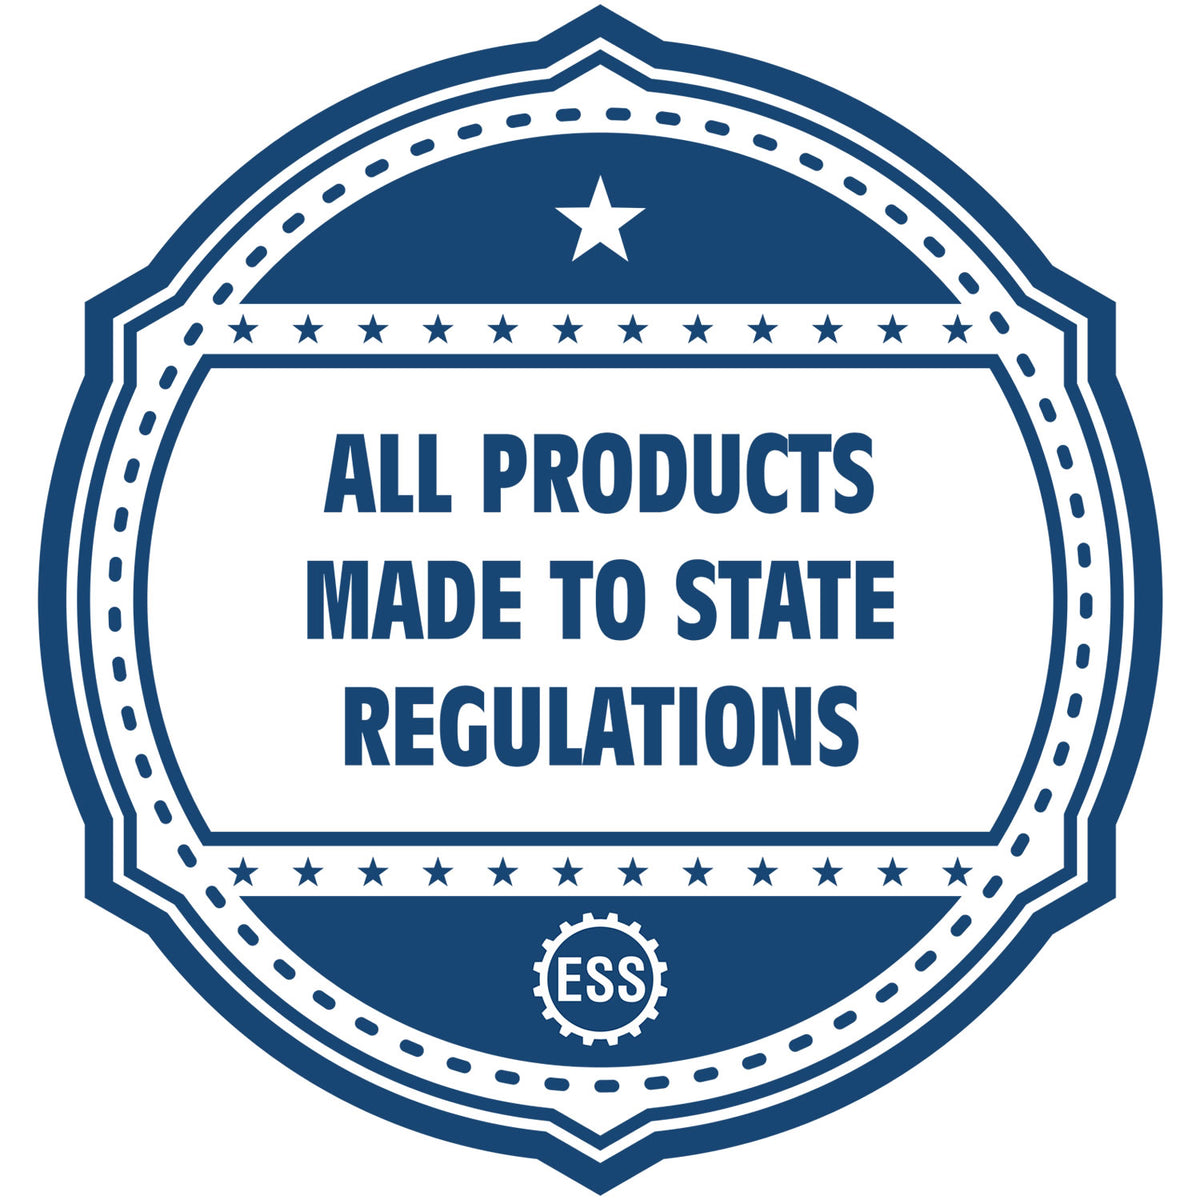 An icon or badge element for the Handheld Alabama Architect Seal Embosser showing that this product is made in compliance with state regulations.